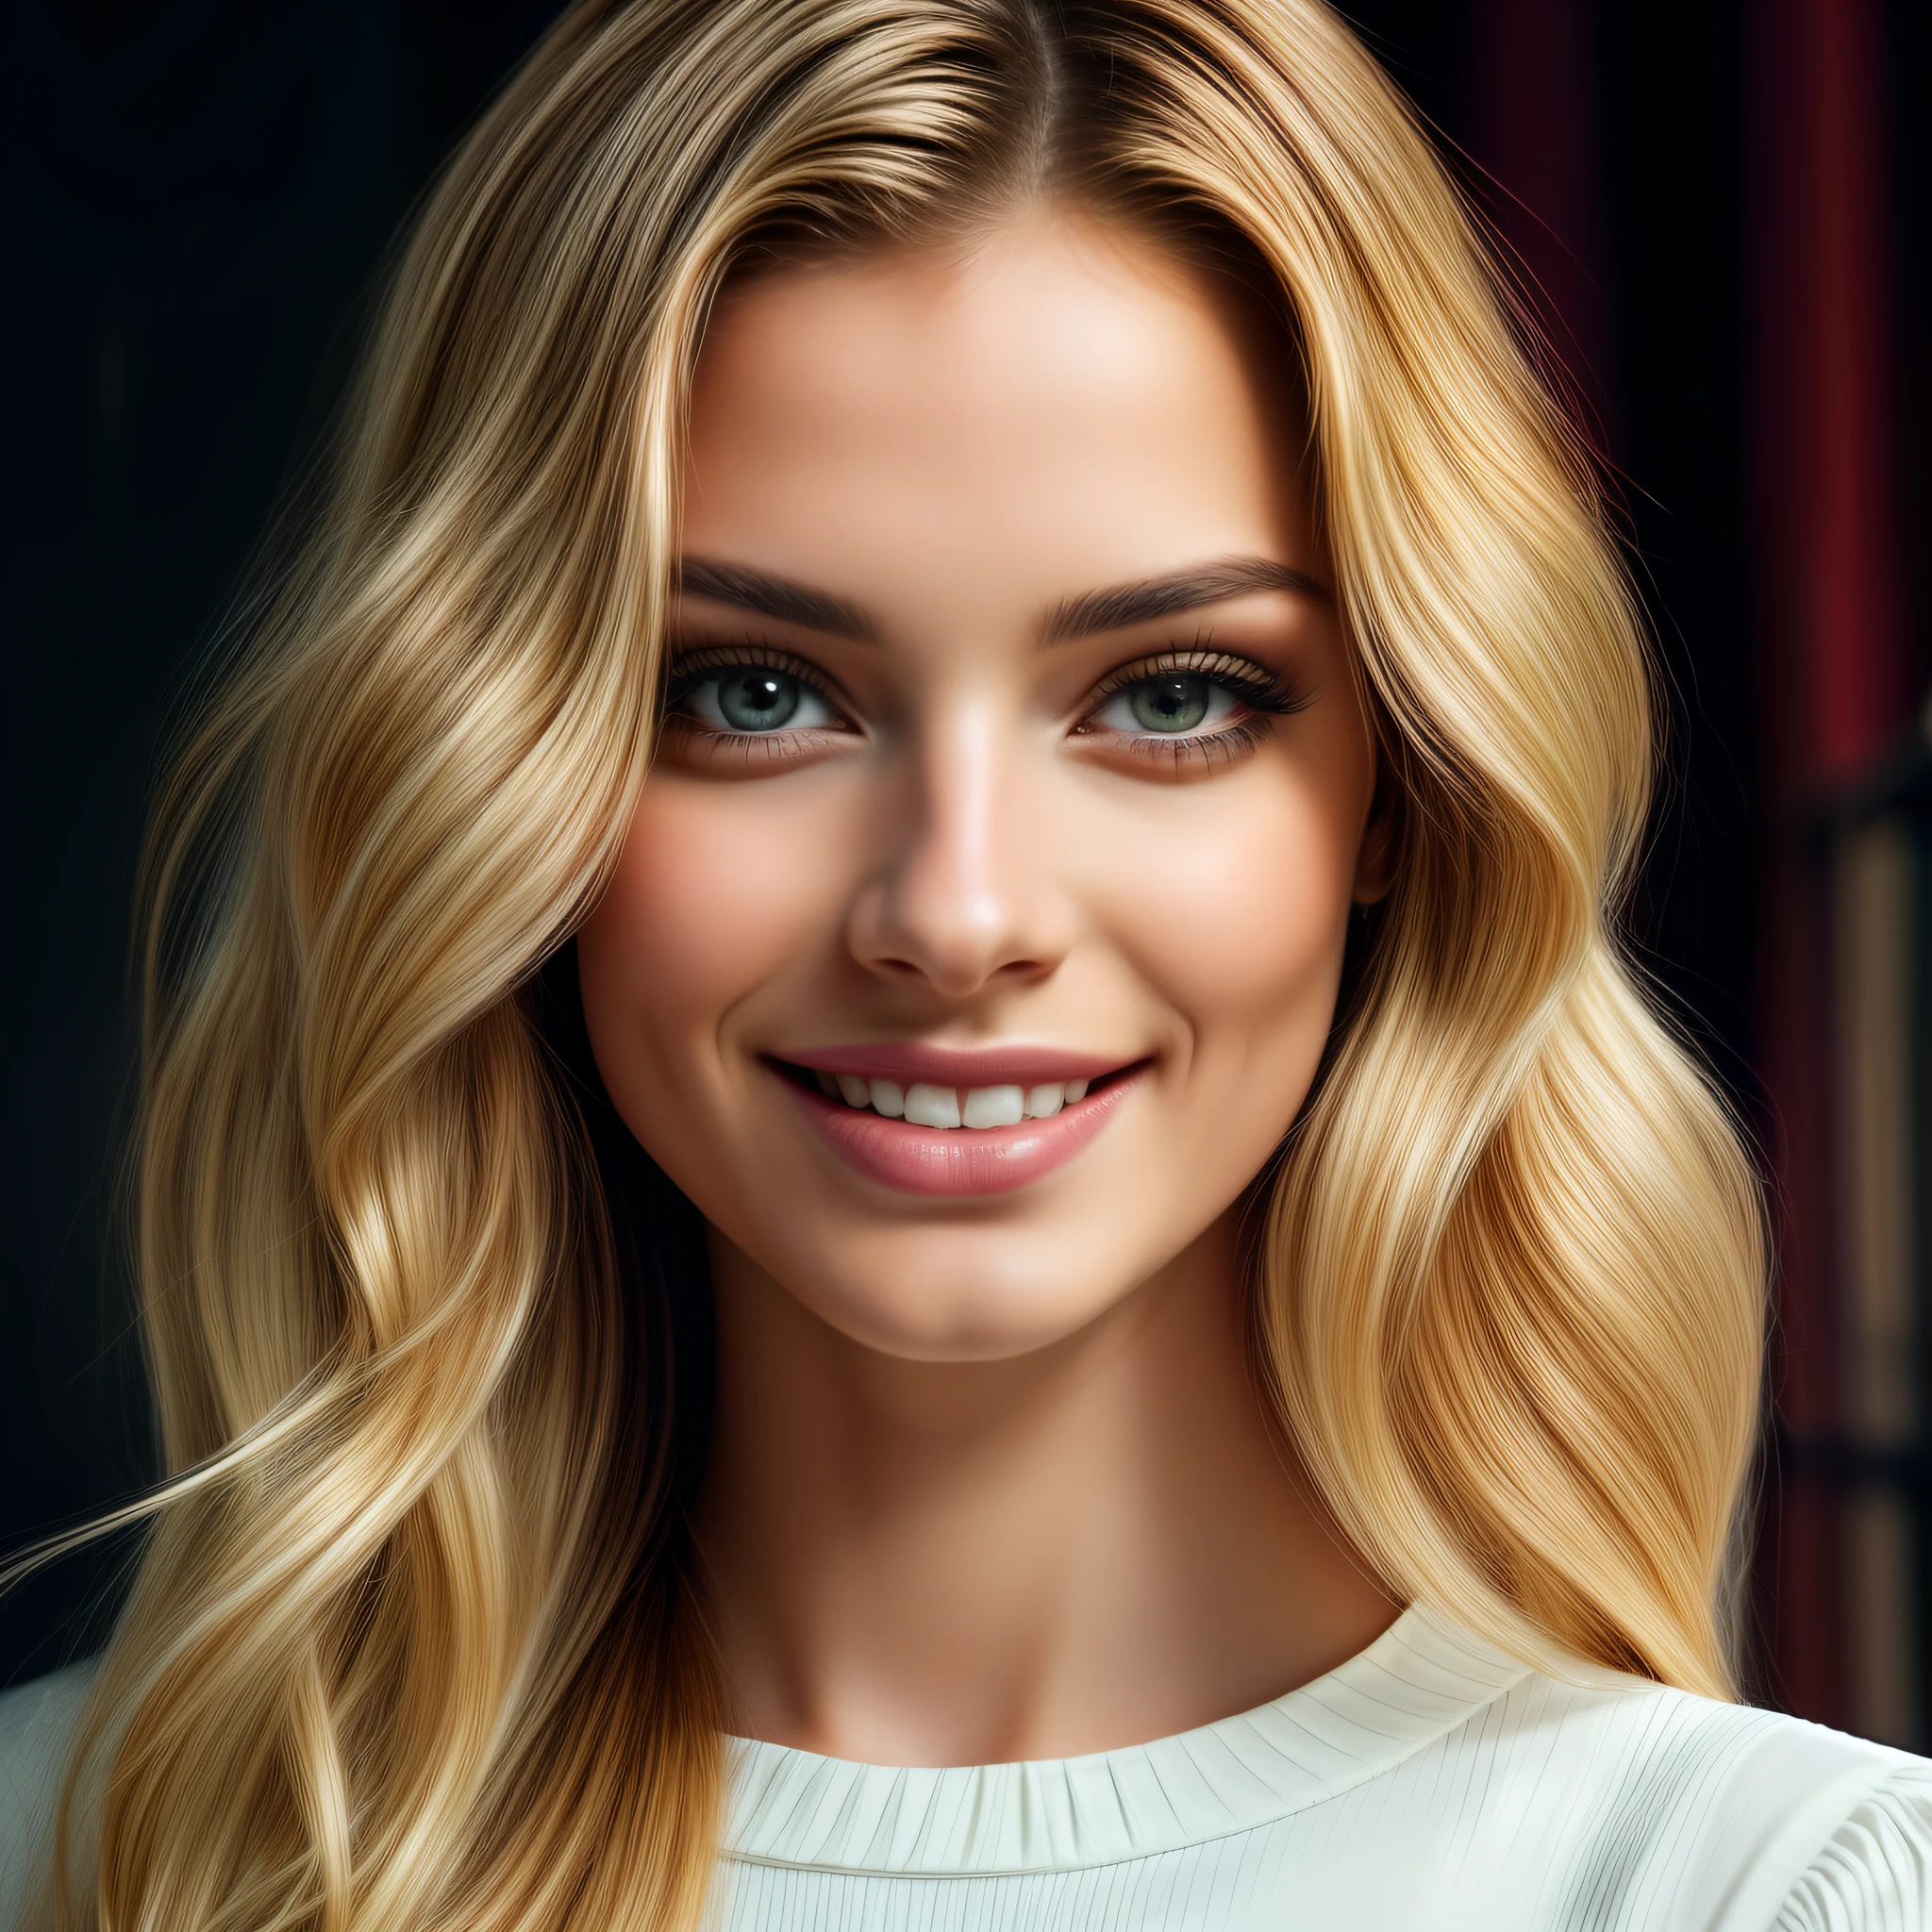 httpS://S.mj.run/Jt_VmkFeeEI beautiful woman in frontal view longblond Hair with Wavy Hair Foto, Foto, high detailS in white background larrge room , 35mm Smile woman, (maSterpiece), (beSt quality), (gute Qualität), (highreS), beSt quality, high reSolution fix, helle, erstaunliche Beleuchtung, Detailverbesserung, (MaSterpiece), (BeSt Quality), (gute Qualität), (HighreS), beSt quality, high reSolution fix, helle, erstaunliche Beleuchtung, Detailverbesserung , The reSolution iS 8k,with a cinematic aSpect ratio of of 32K Stylize 1000 T